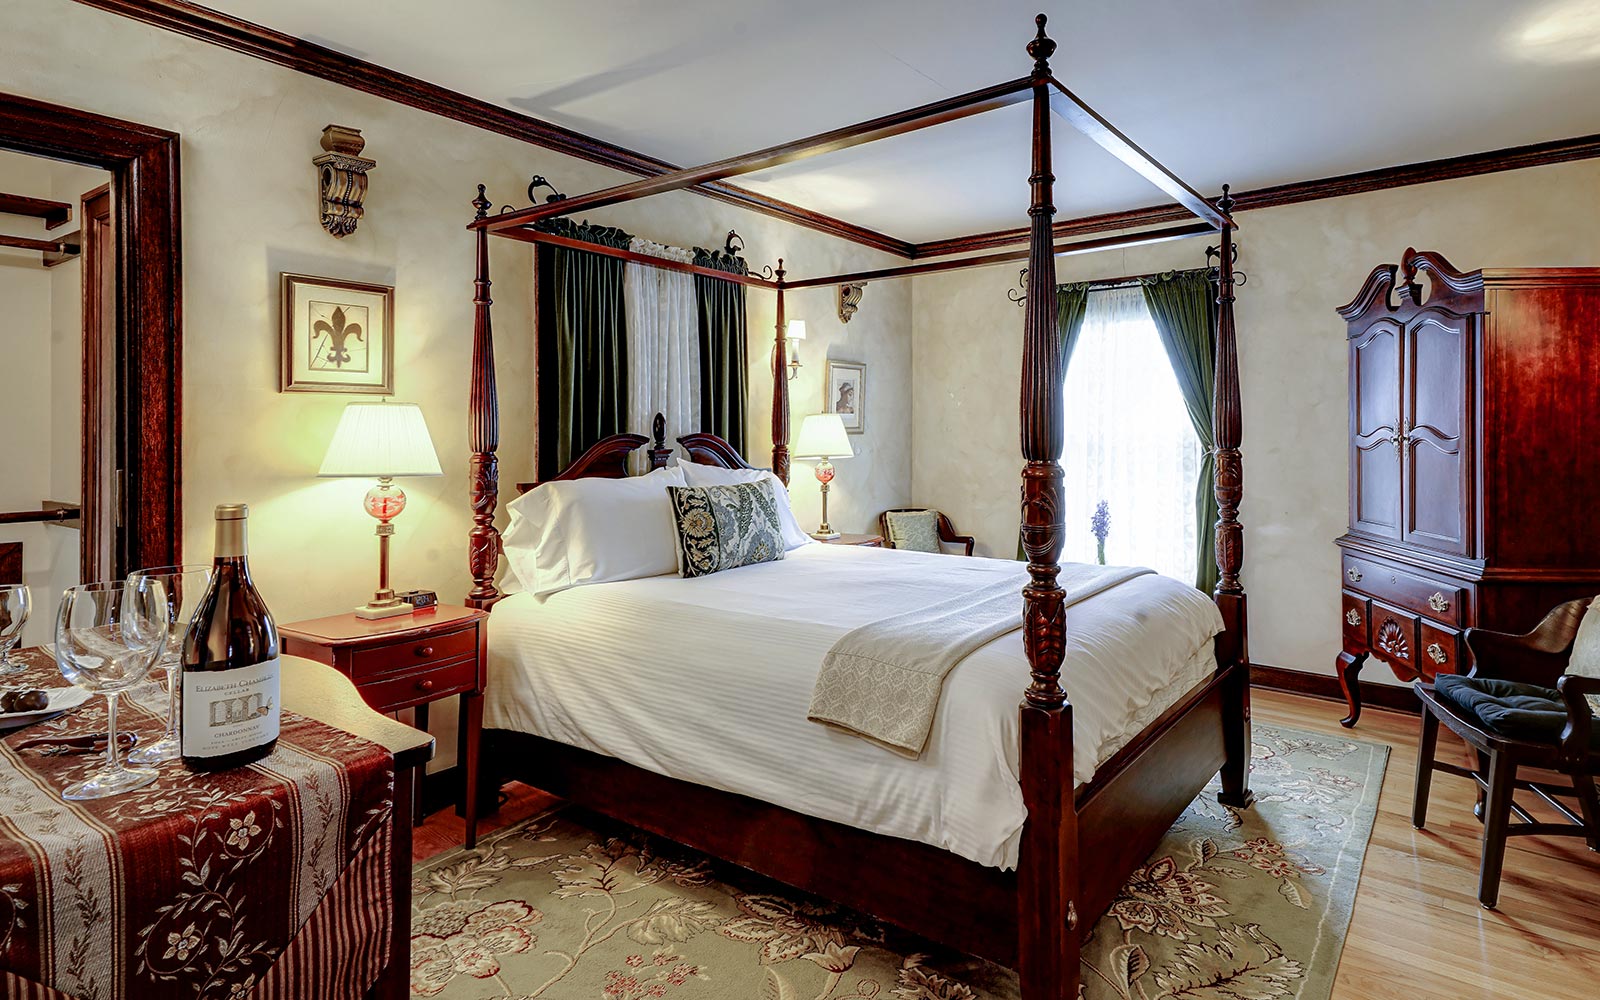 A beautiful guest room, perfect for romantic getaways in Oregon